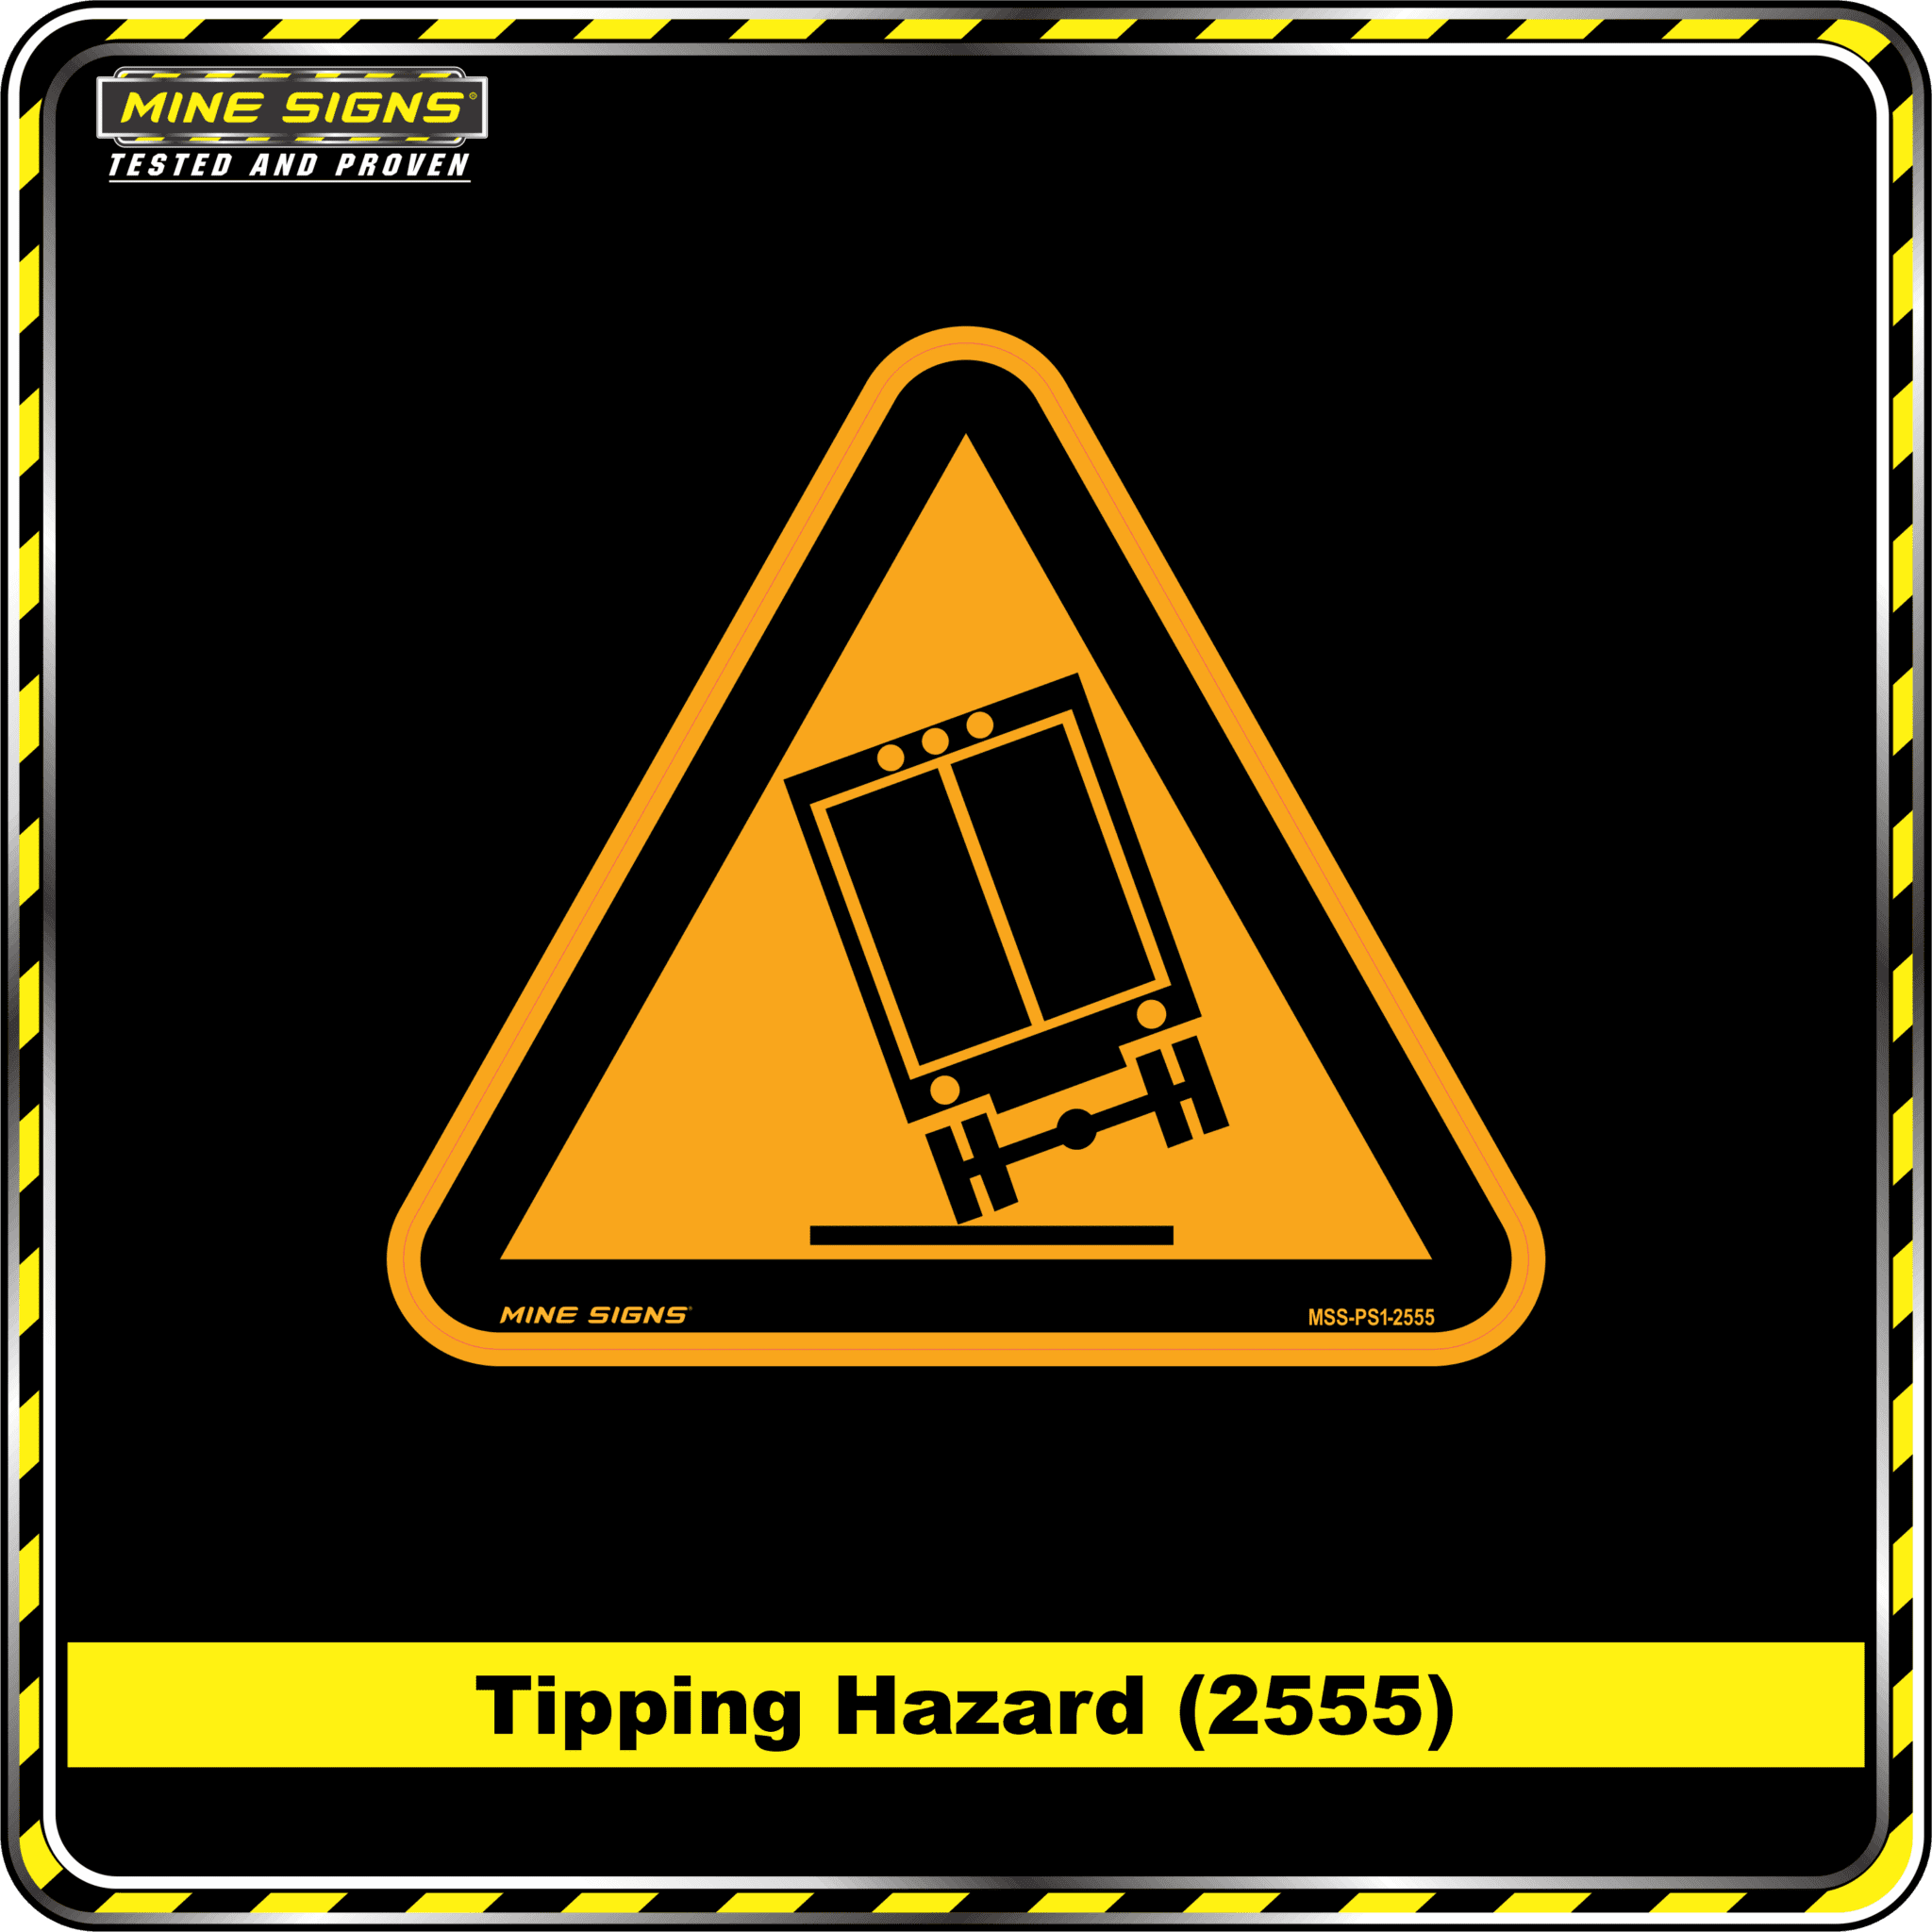 MS - Product Background - Safety Signs - Tipping Hazard 2555